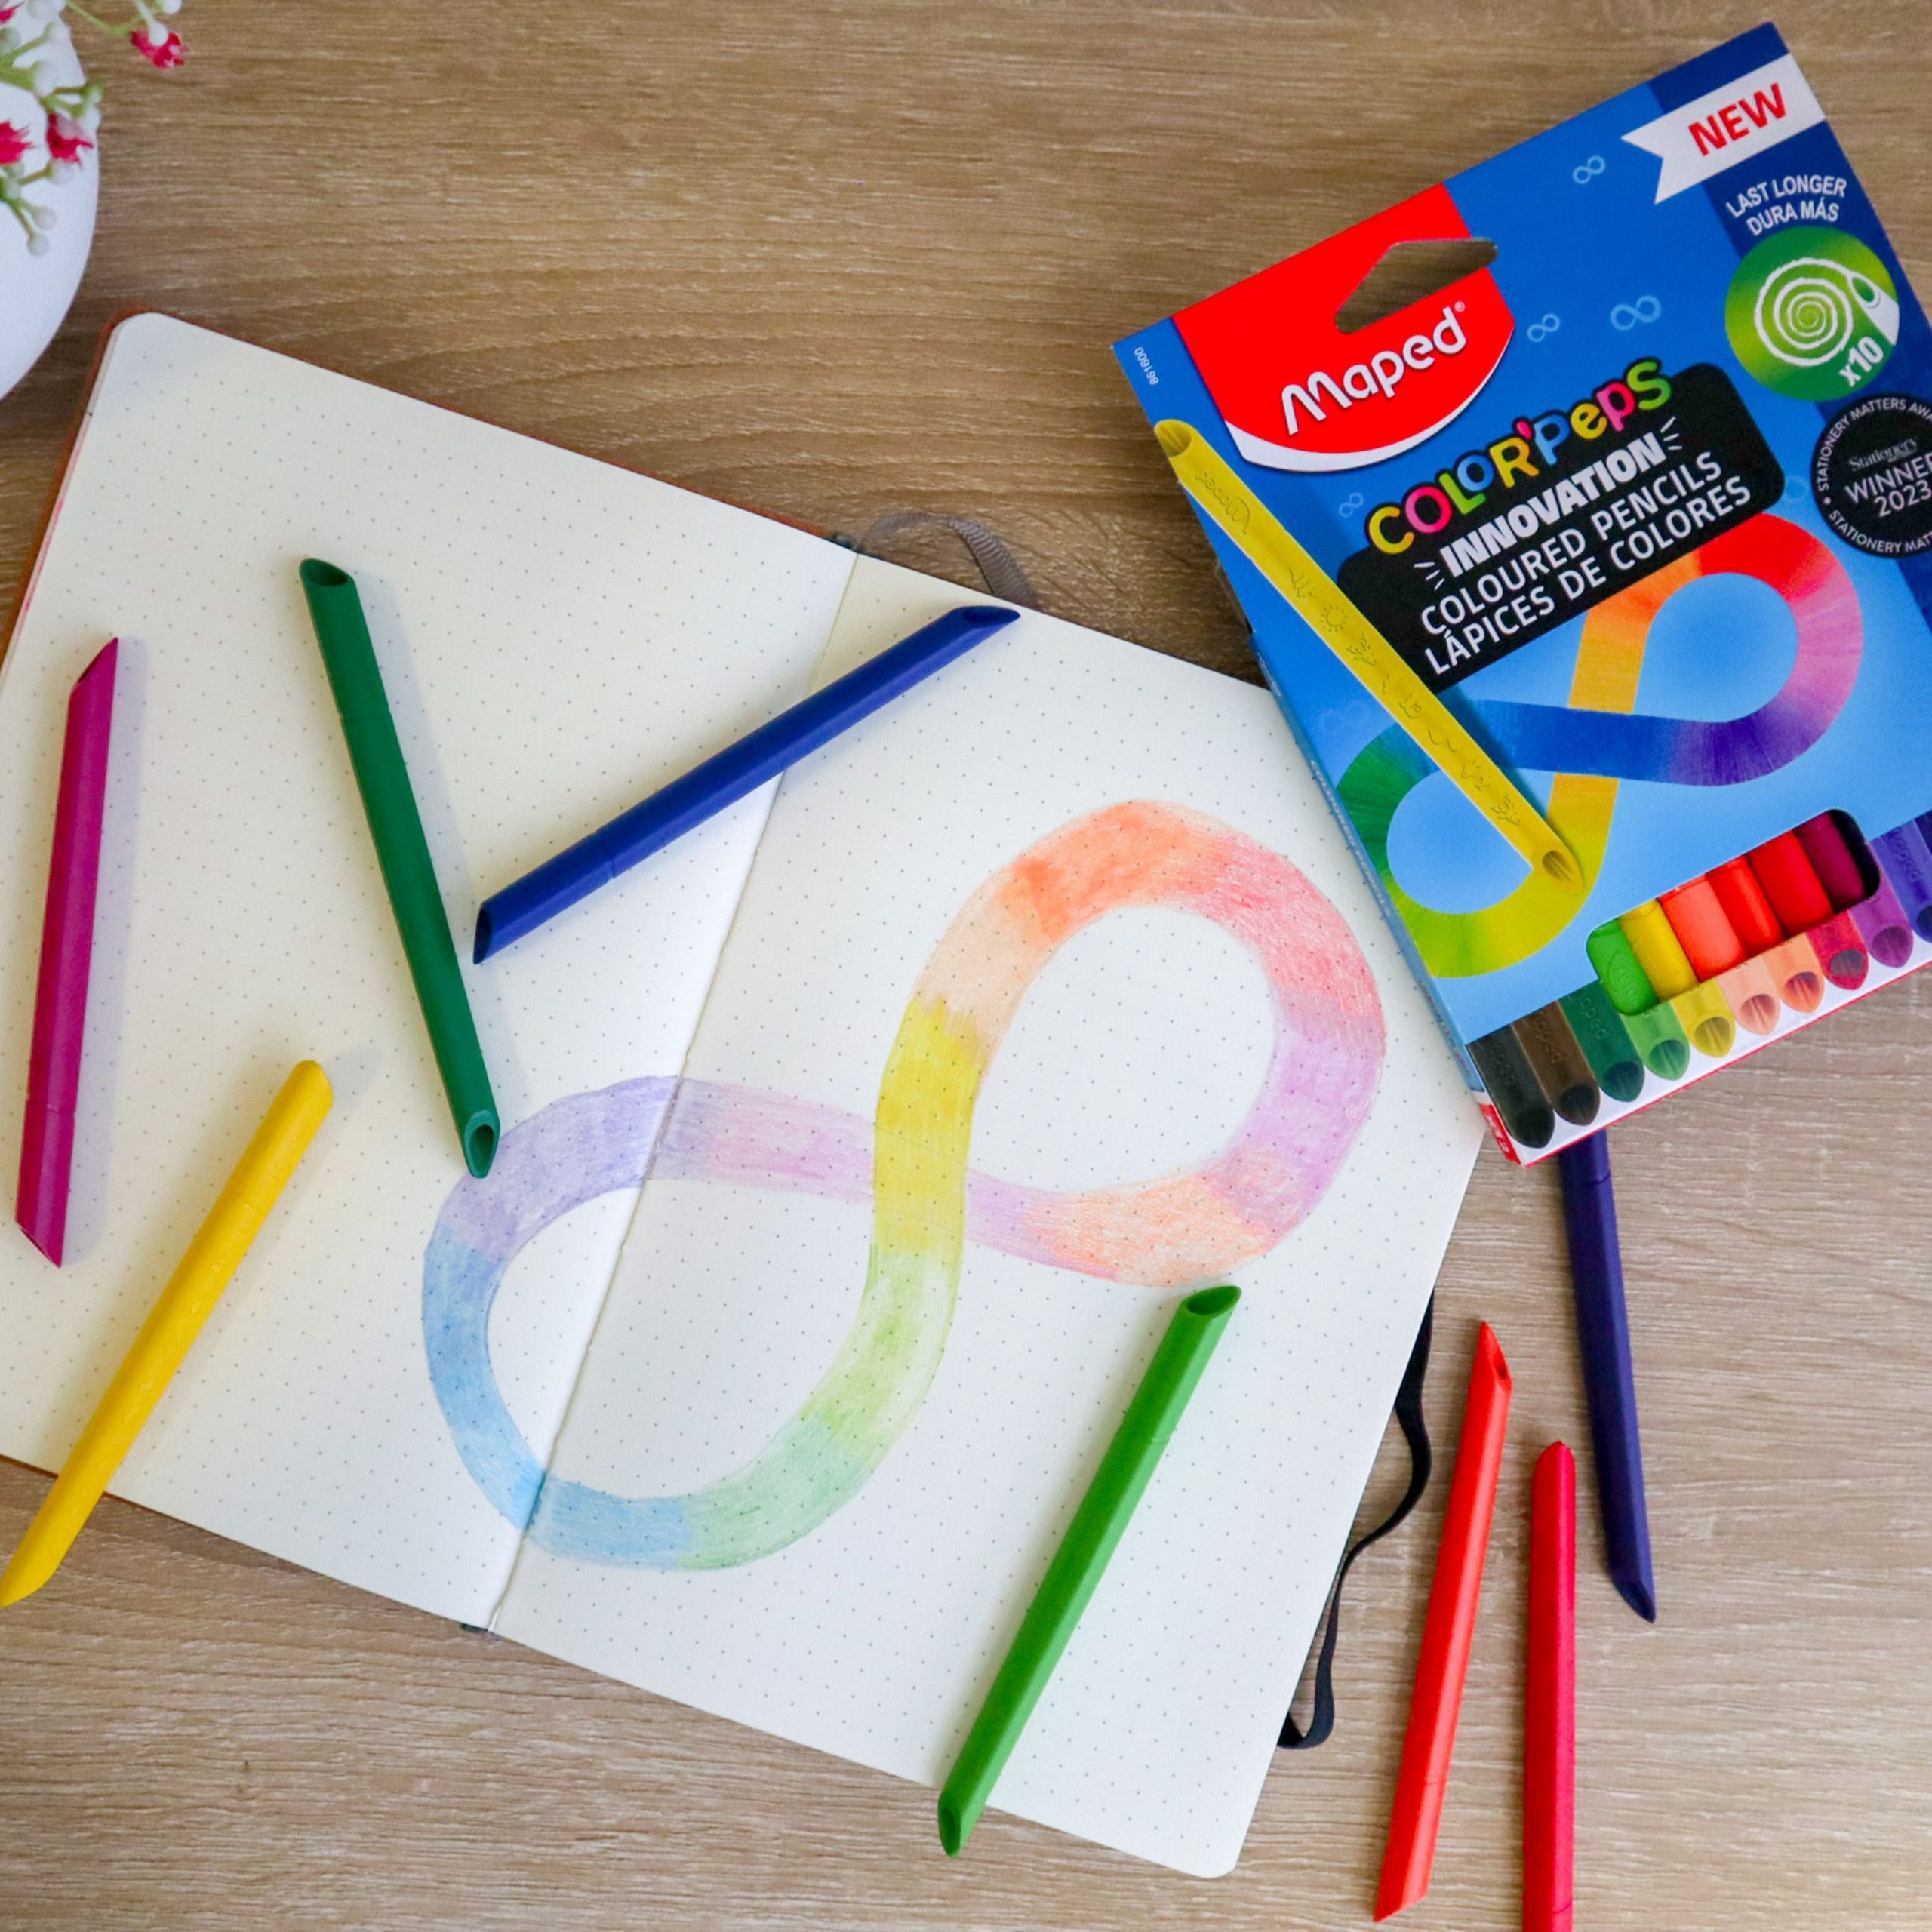 infinity colouring pencils with infinity sign in notebook